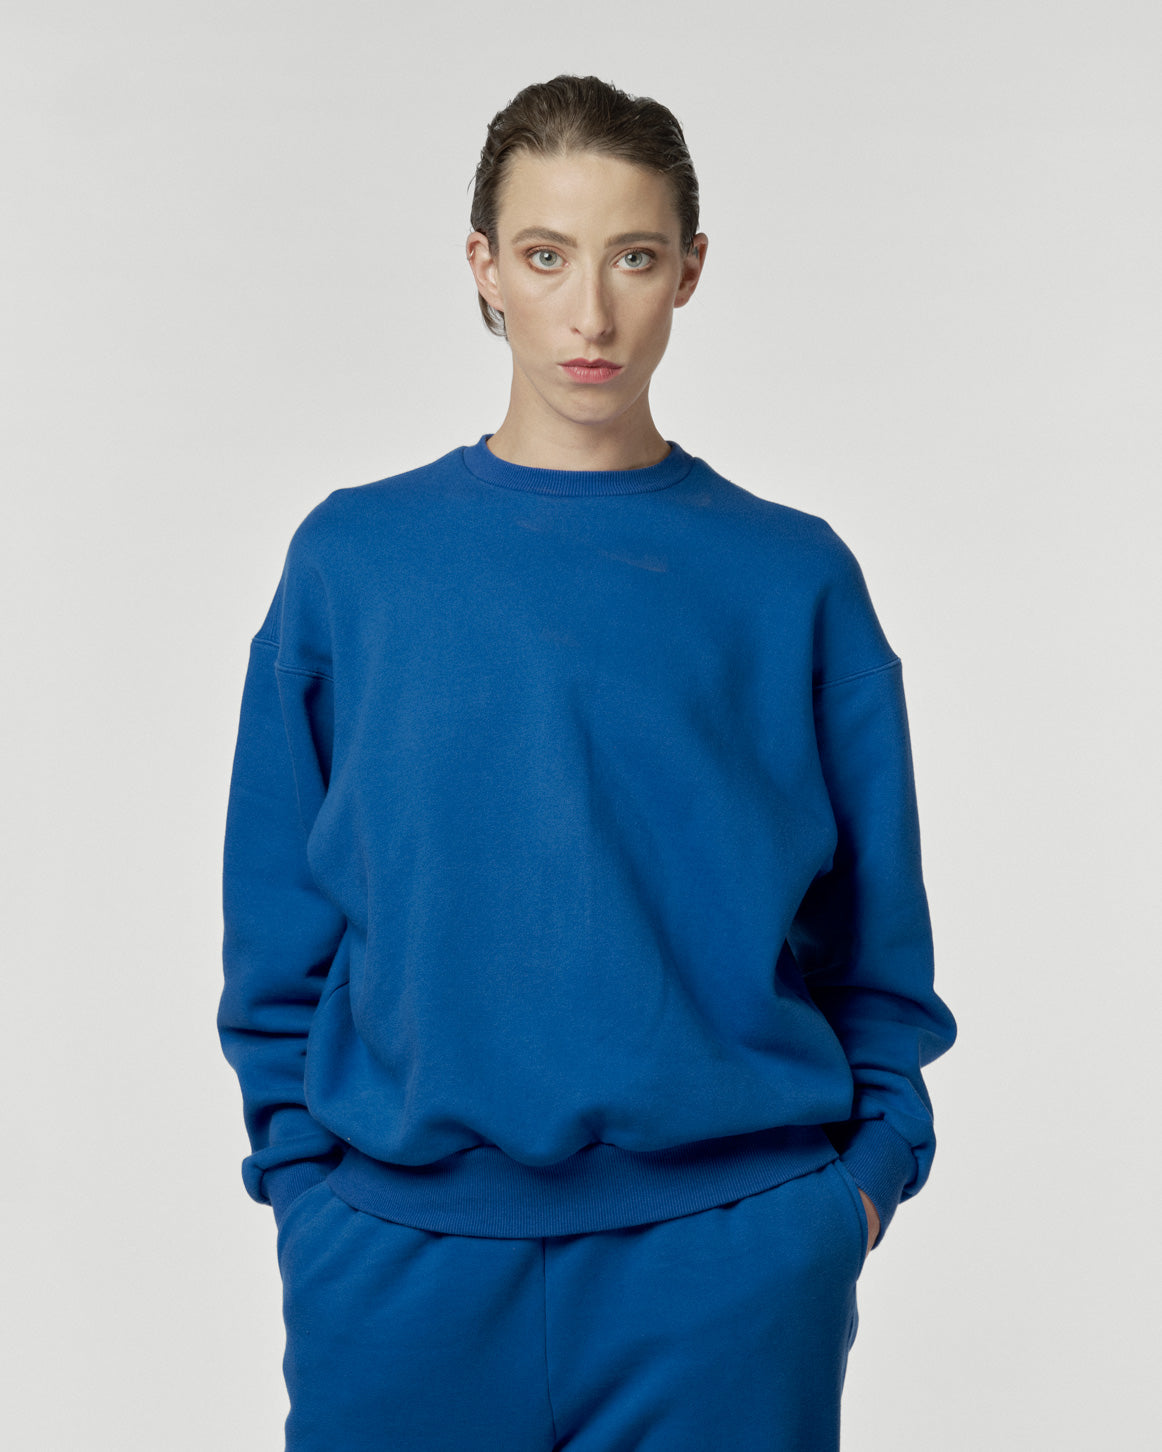 CPS.05_Sweater-Blue_Unisex